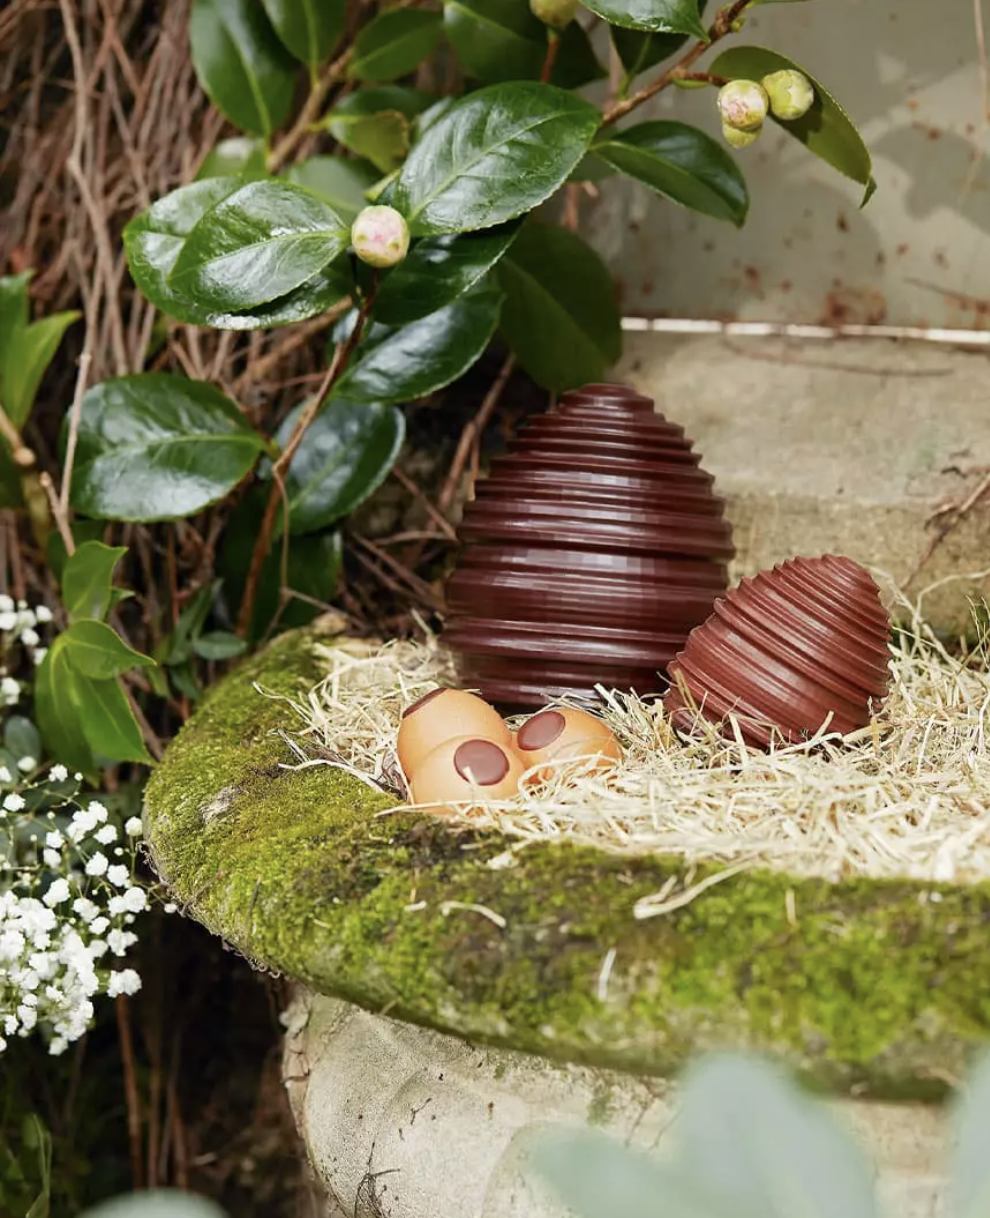 Easter offerings by Le Chocolat Alain Ducasse